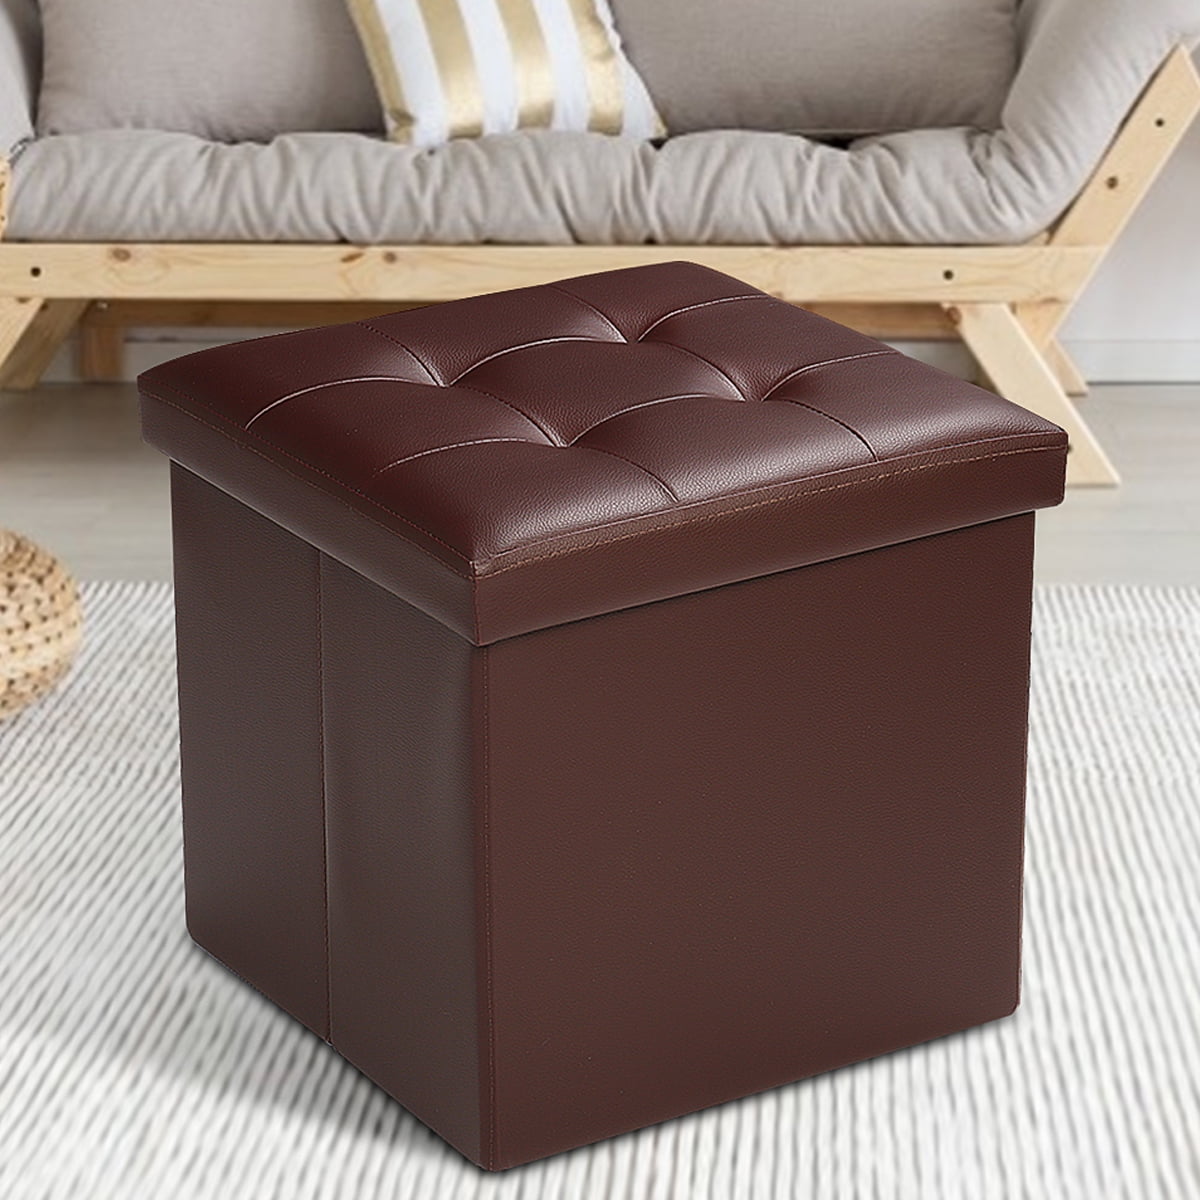 Square 15 Storage Ottoman Folding, Square Brown Leather Ottoman With Storage